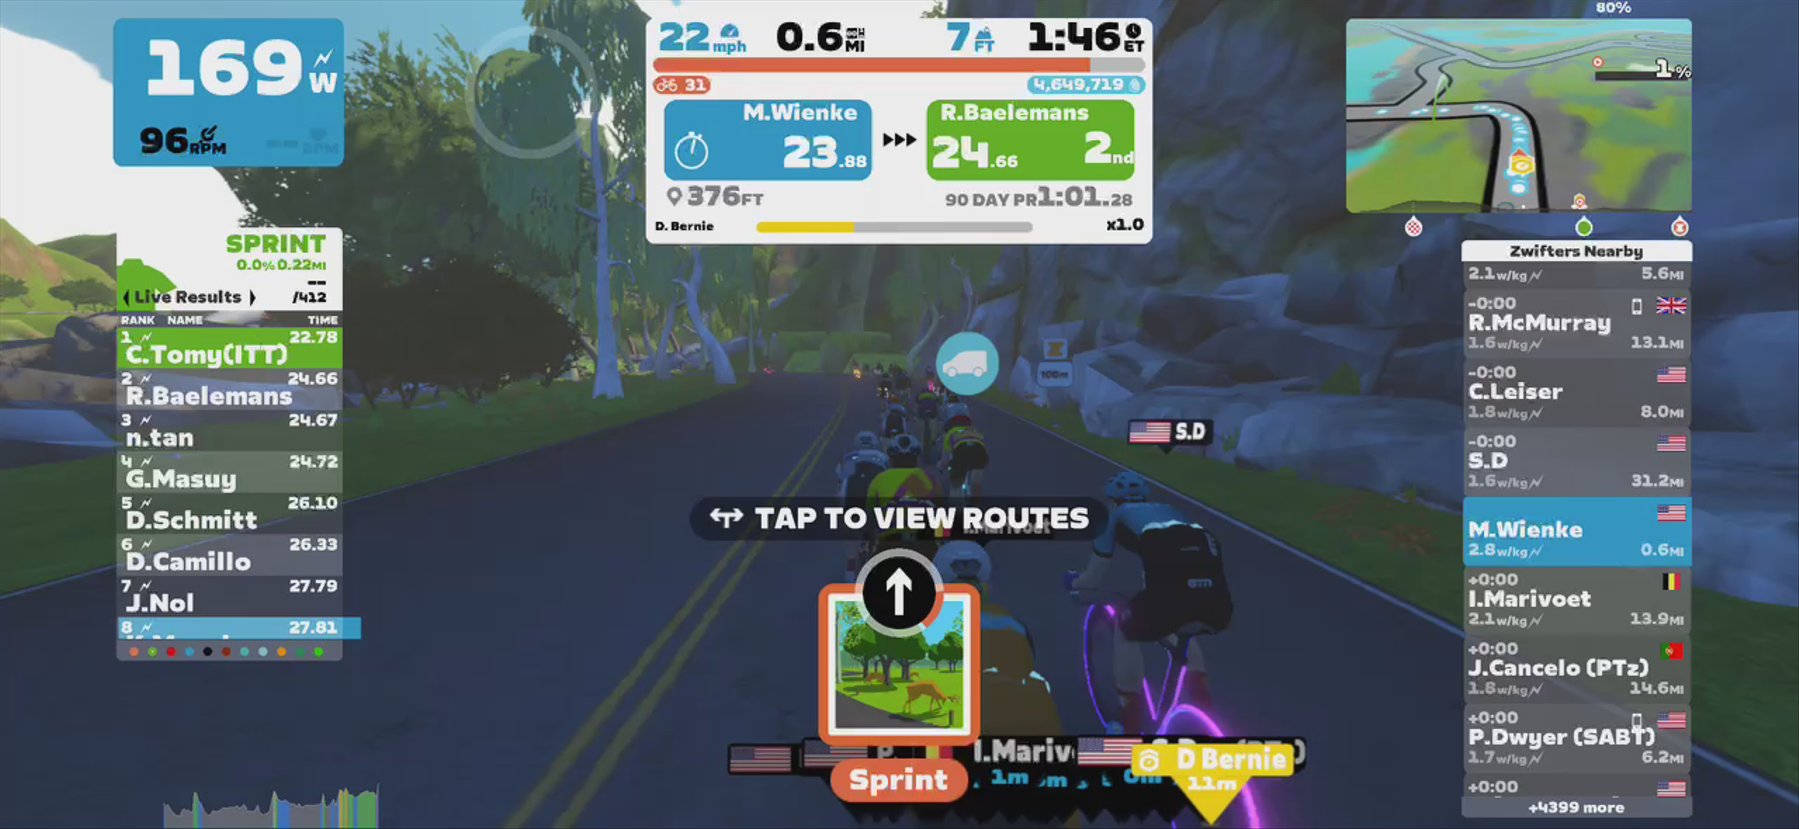 45 min - Zwift - Pacer Group Ride: Flat Route in Watopia with Bernie